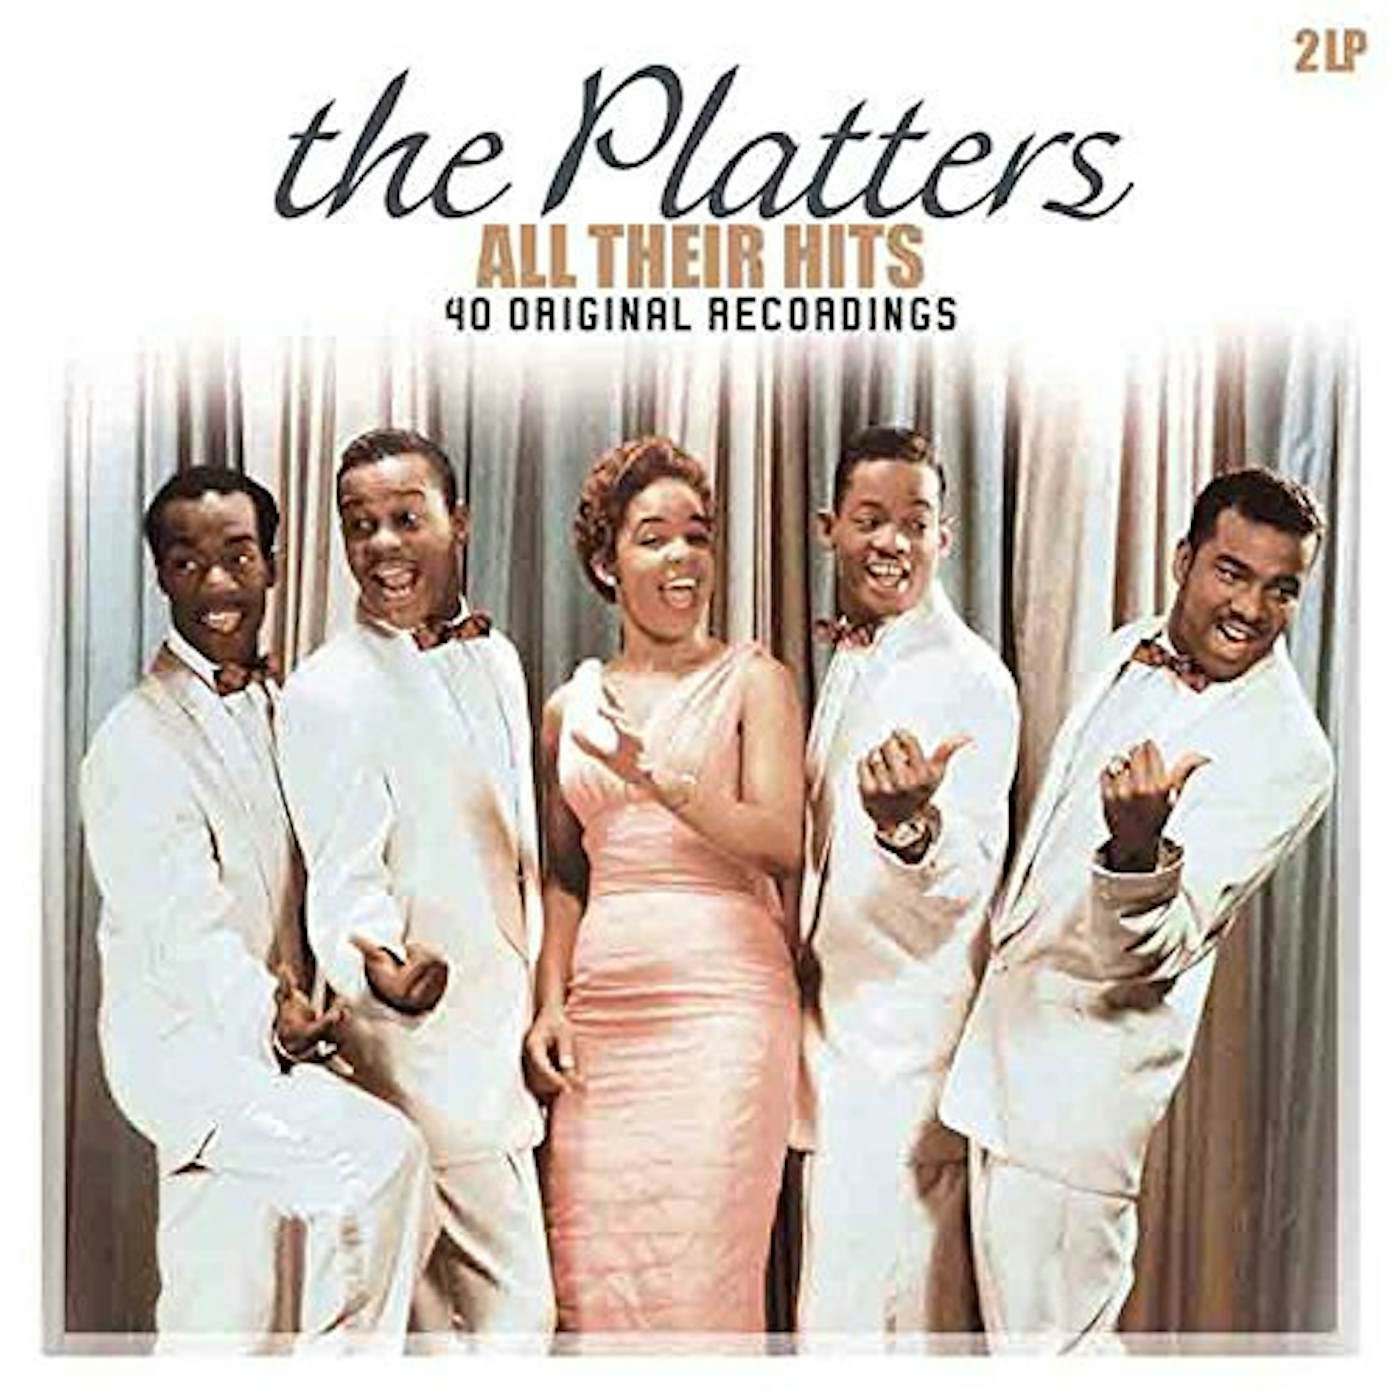 The Platters ALL THEIR HITS Vinyl Record